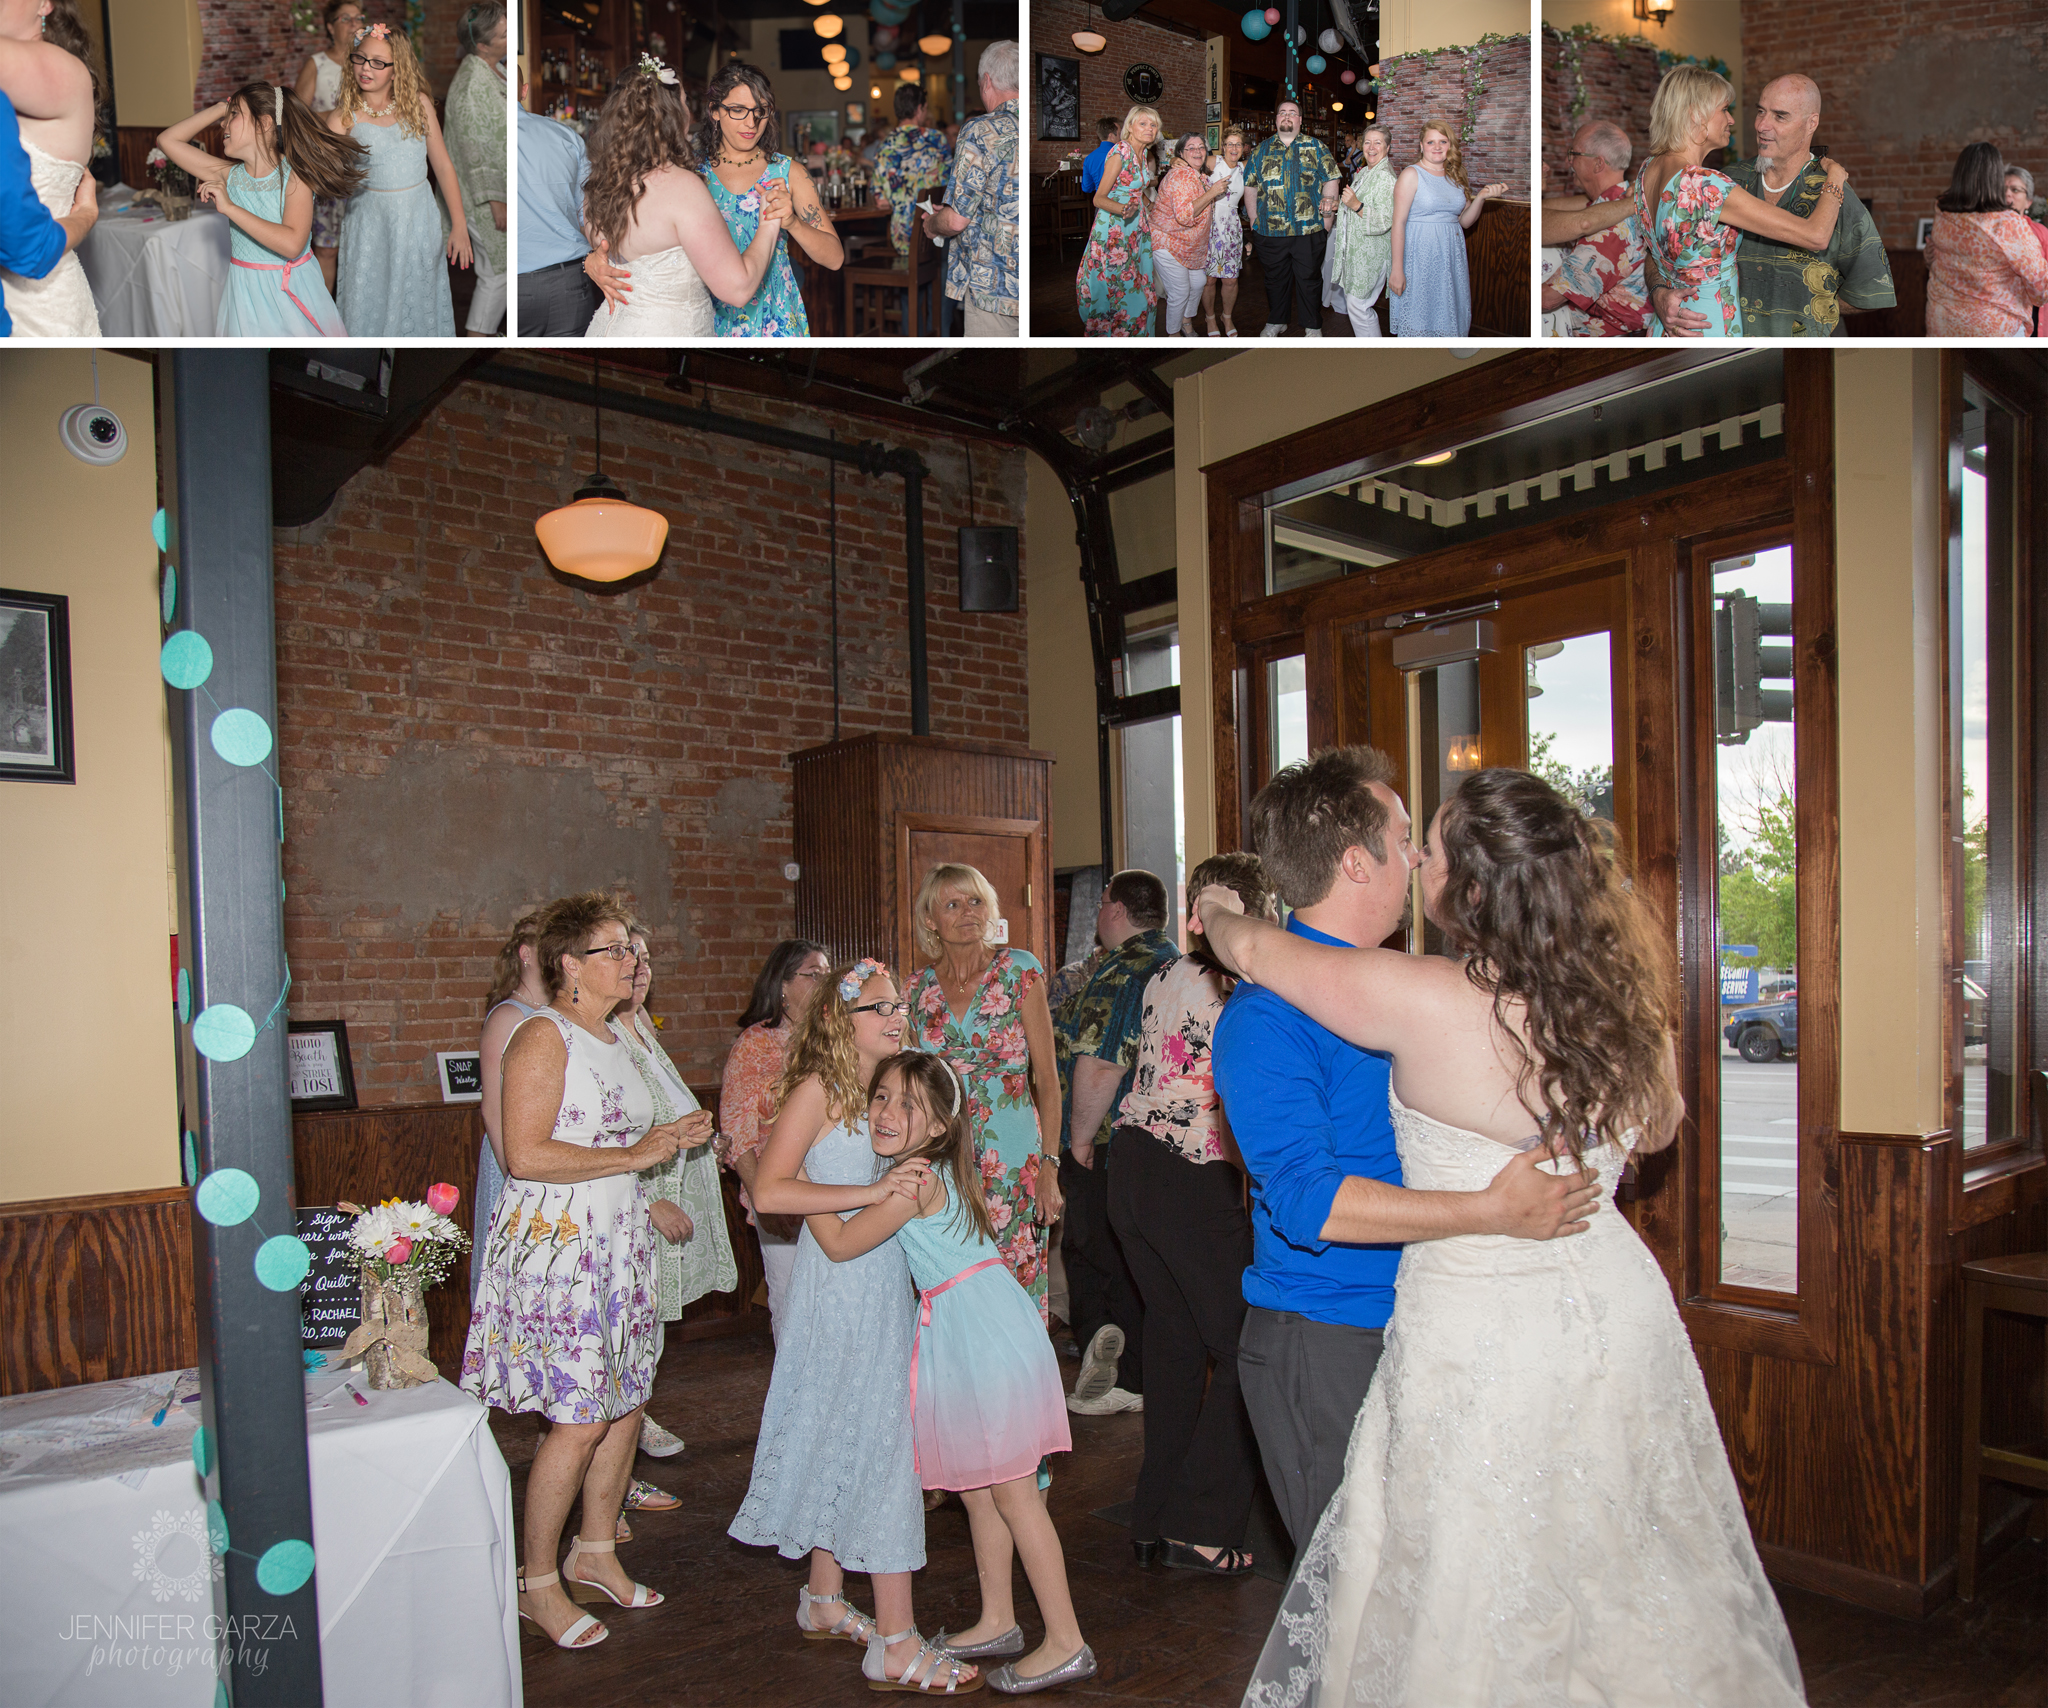 Guest's dancing during a summer wedding at a pub. Rachael & Wes' Wash Park and Irish Rover Pub Denver Wedding by Colorado Wedding Photographer, Jennifer Garza. Colorado Wedding Photographer, Denver Wedding Photographer, Colorado Wedding Photos, Denver Wedding Photos, Colorado Bride, Denver Bride, Wash Park Wedding, Wash Park, Irish Rover Pub, Irish Rover Pub Wedding, Pub Wedding, Park Wedding